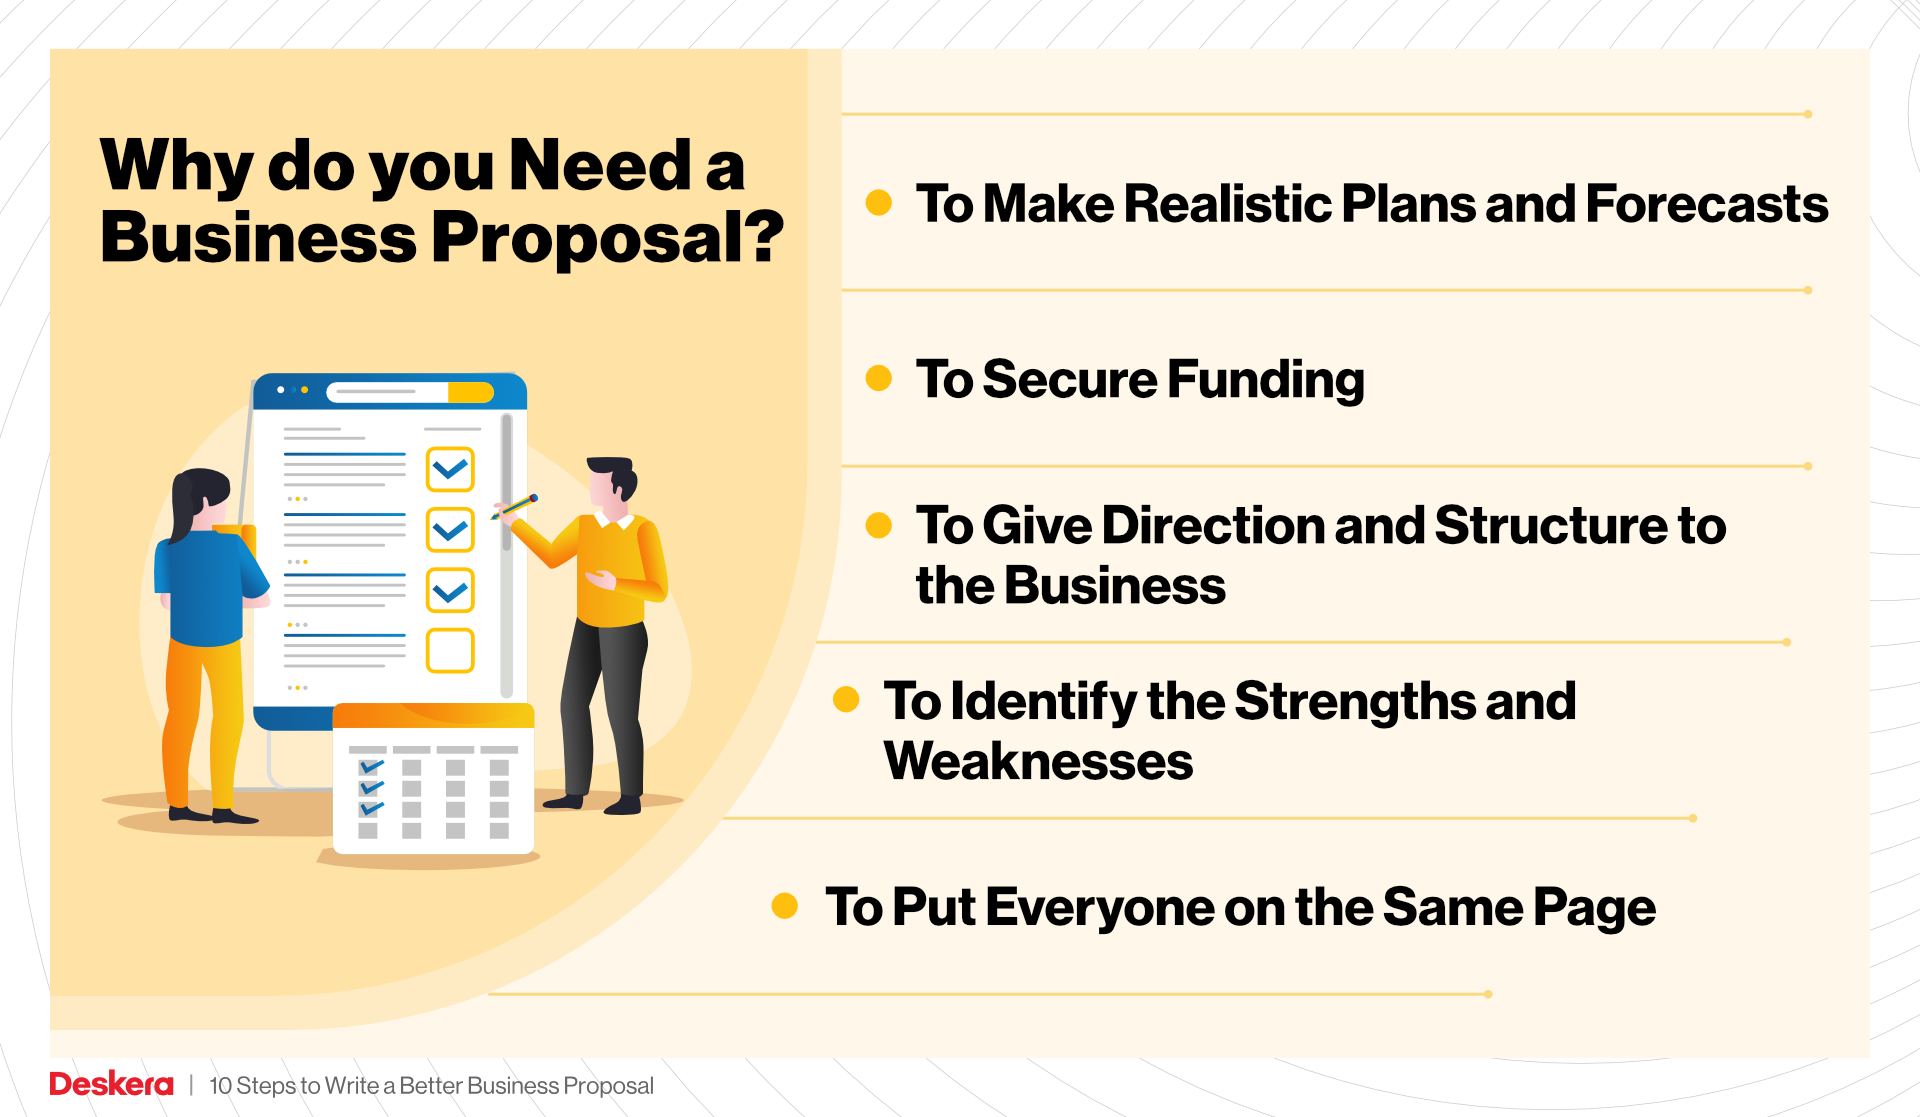 Why do you Need a Business Proposal?